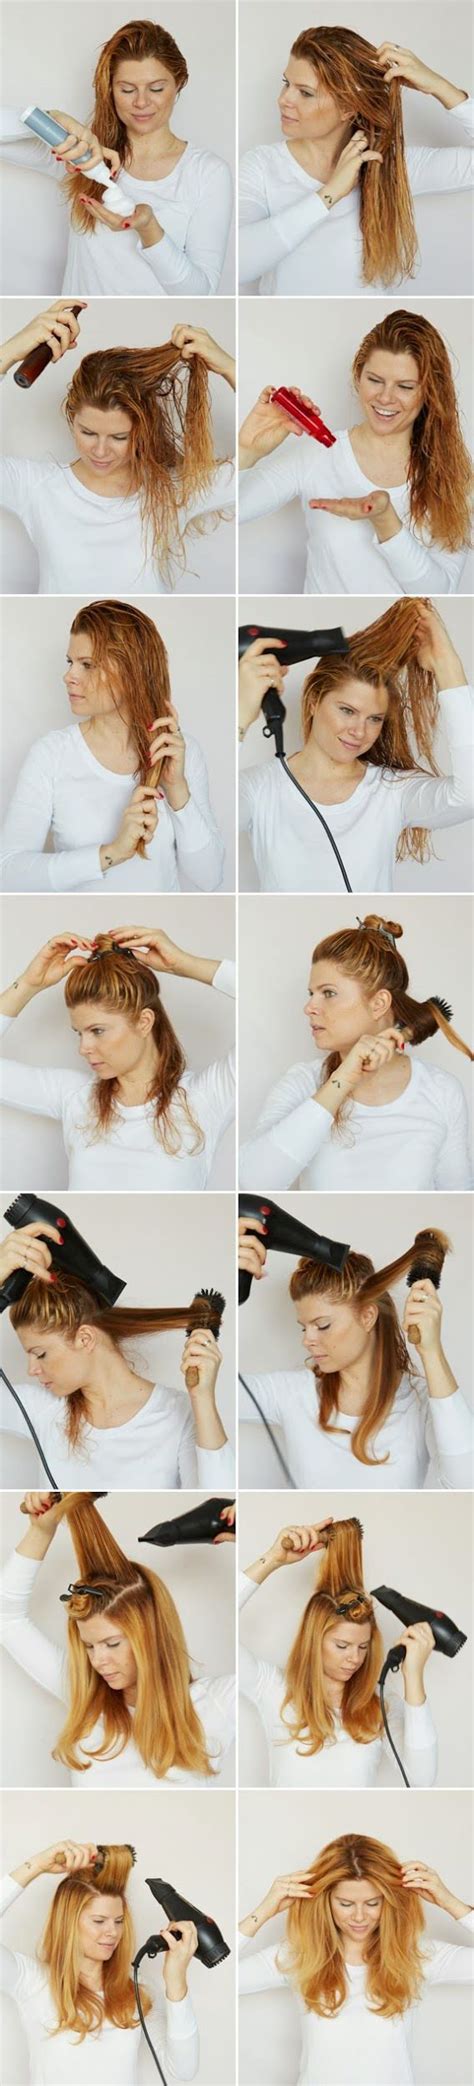 Blowout Hair 5 Ways To Get The Perfect Blowout Hairstyle Hair Beauty